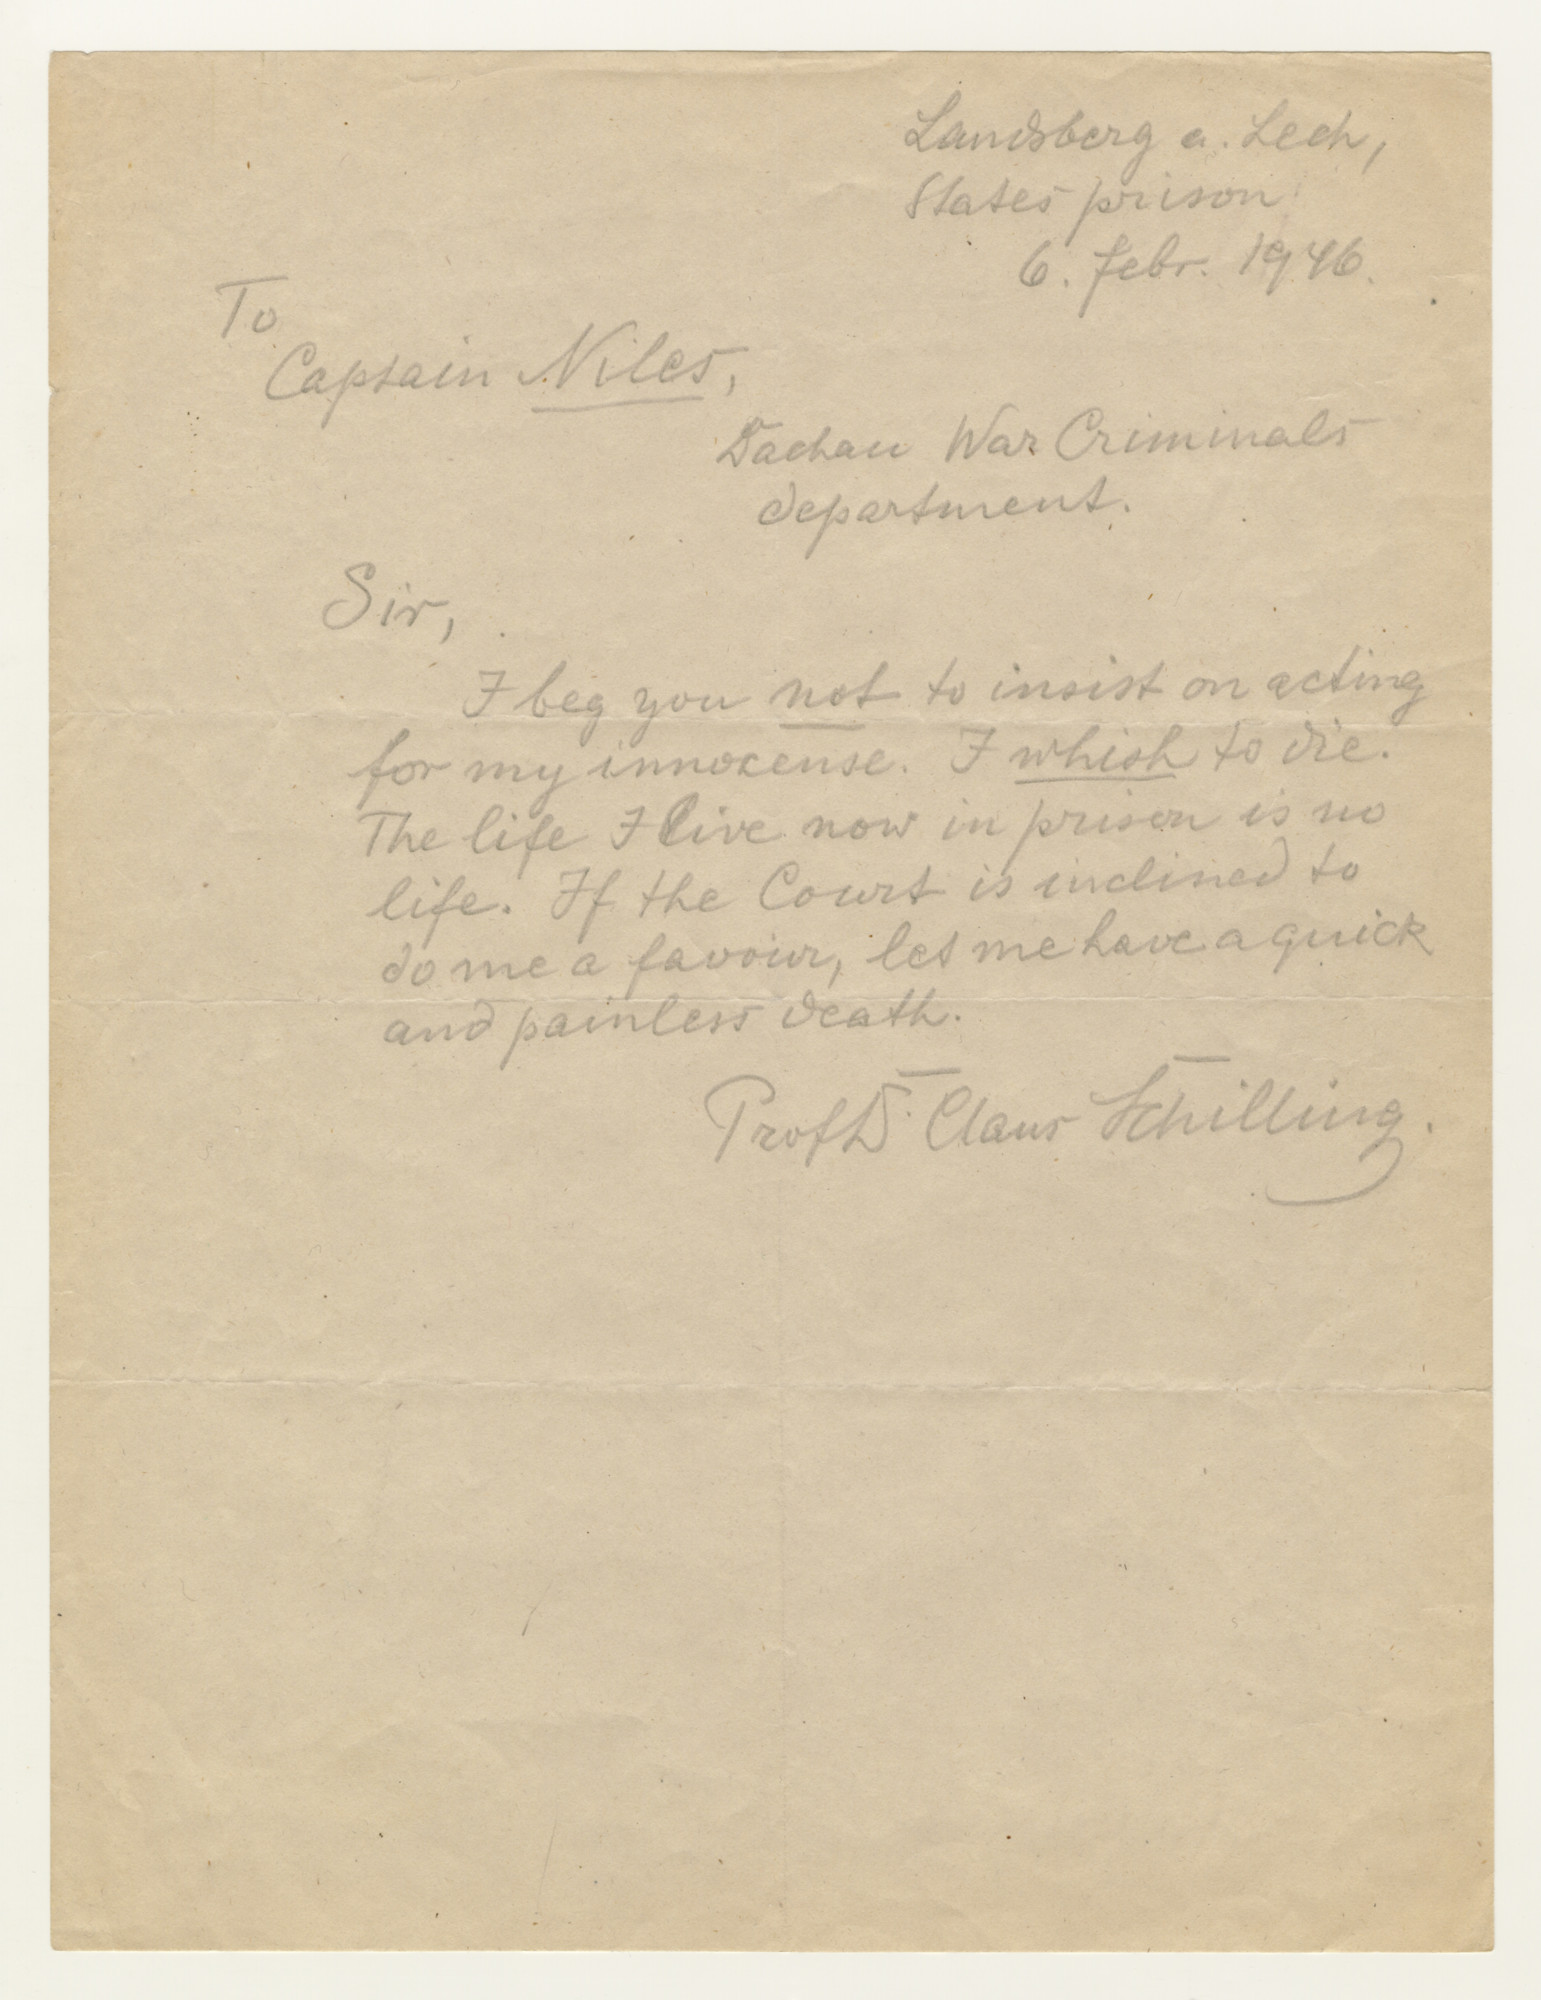 Handwritten letter from defendent Claus Schilling to Dalwin J. Niles, his appointed defense attorney in the Dachau Trials, 

The body of the letter reads, "I beg you not to insist on acting for my innocense [sic].  I whish [sic] to die.  The life I live now in prison is no life.  If theCourt is inclined to do me a favour, let me have a quick an painless death."